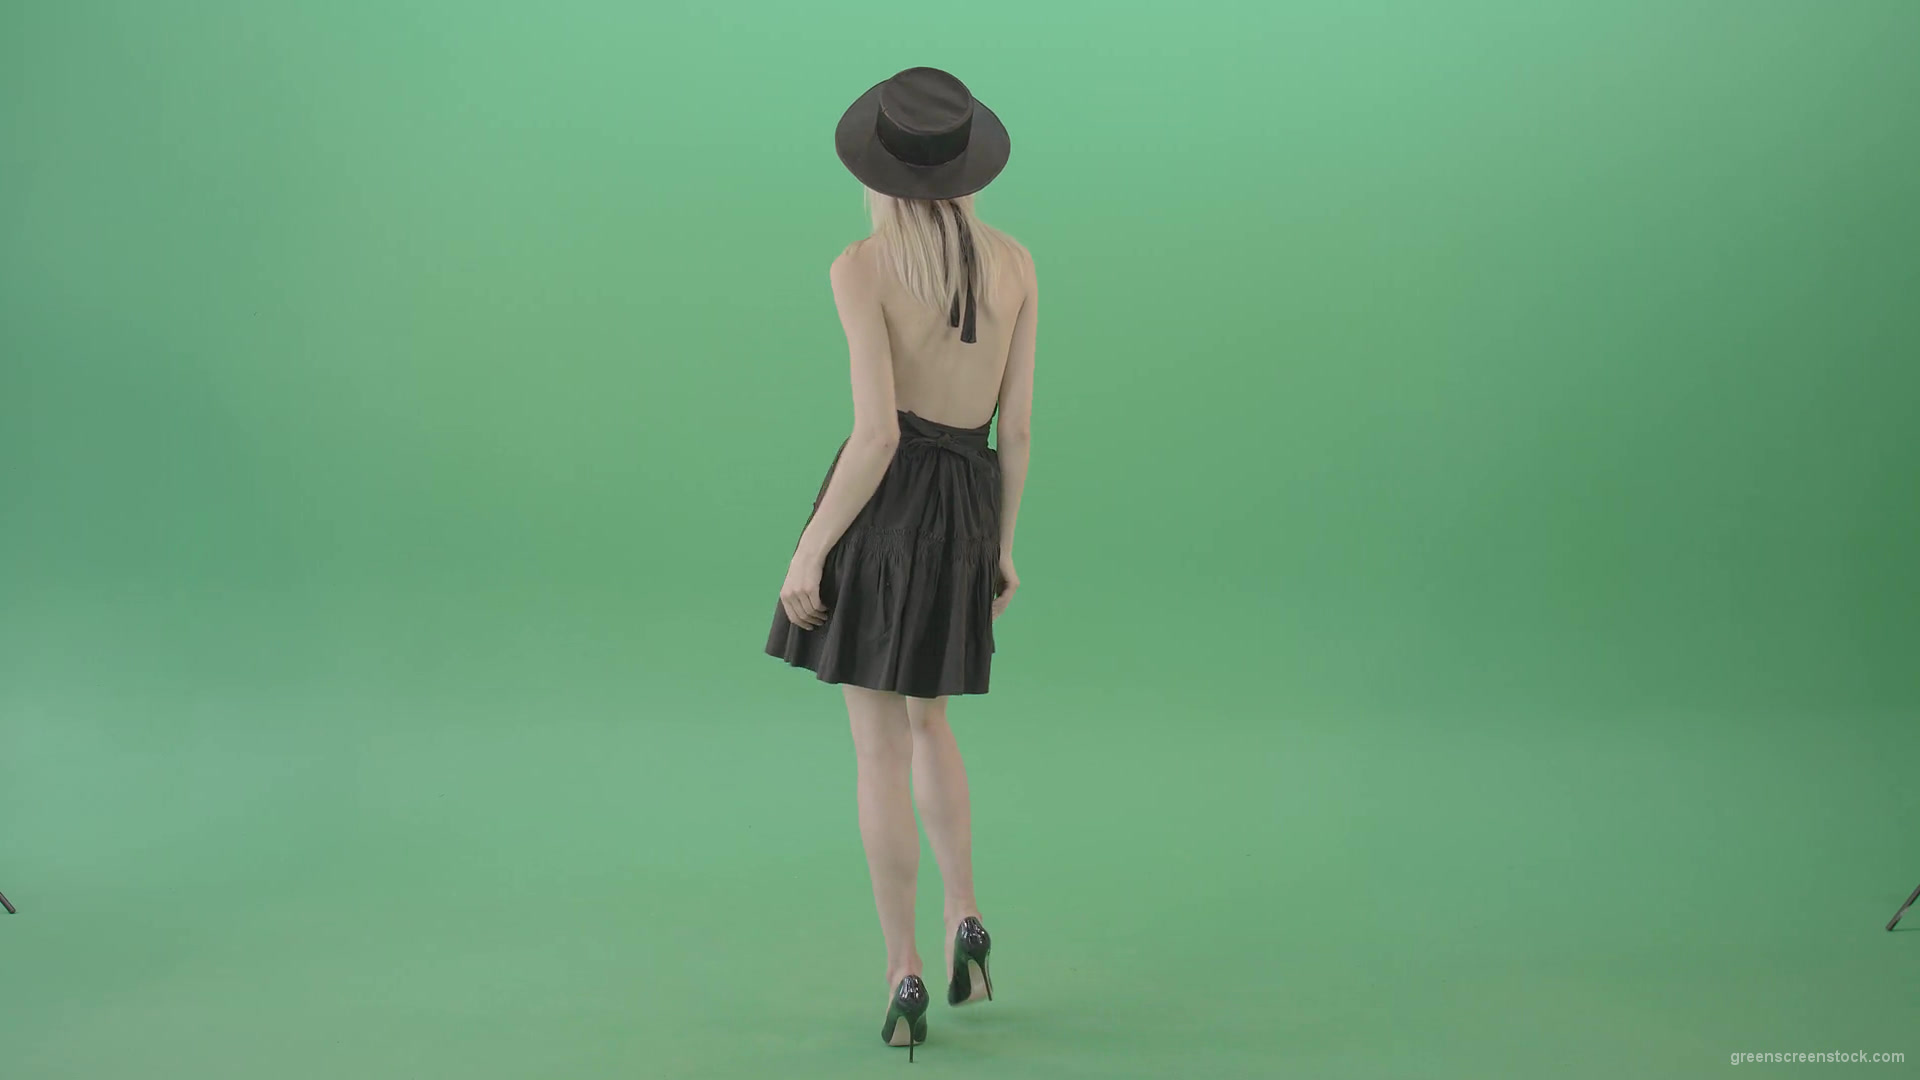 Sexy-blonde-girl-dancing-in-black-fashion-wear-dress-isolated-on-chromakey-Green-Screen-Video-Footage-1920_009 Green Screen Stock